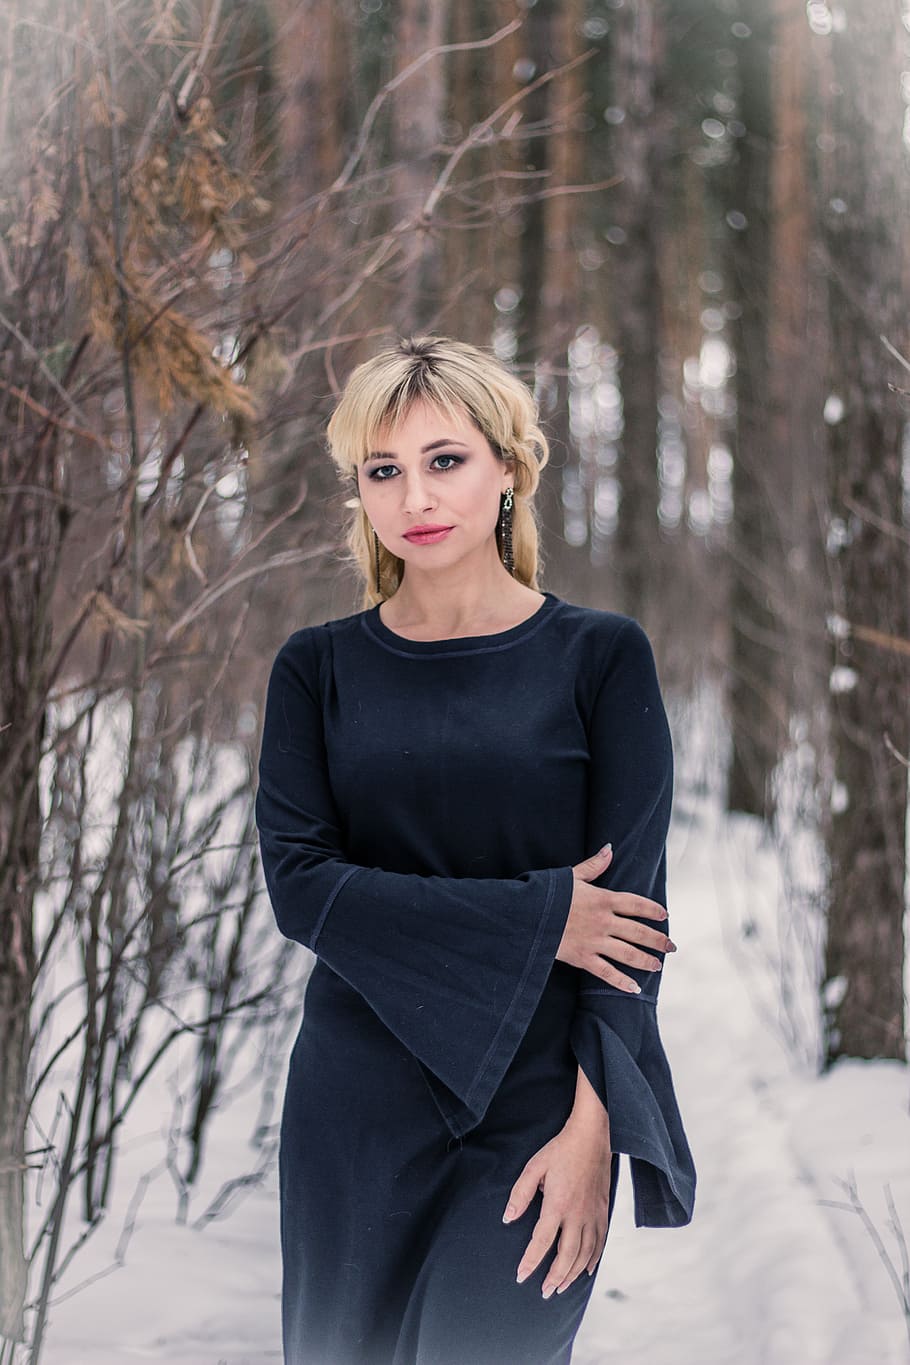 woman, black, long-sleeved, dress, surrounded, bare, tree, daytime, winter, forest